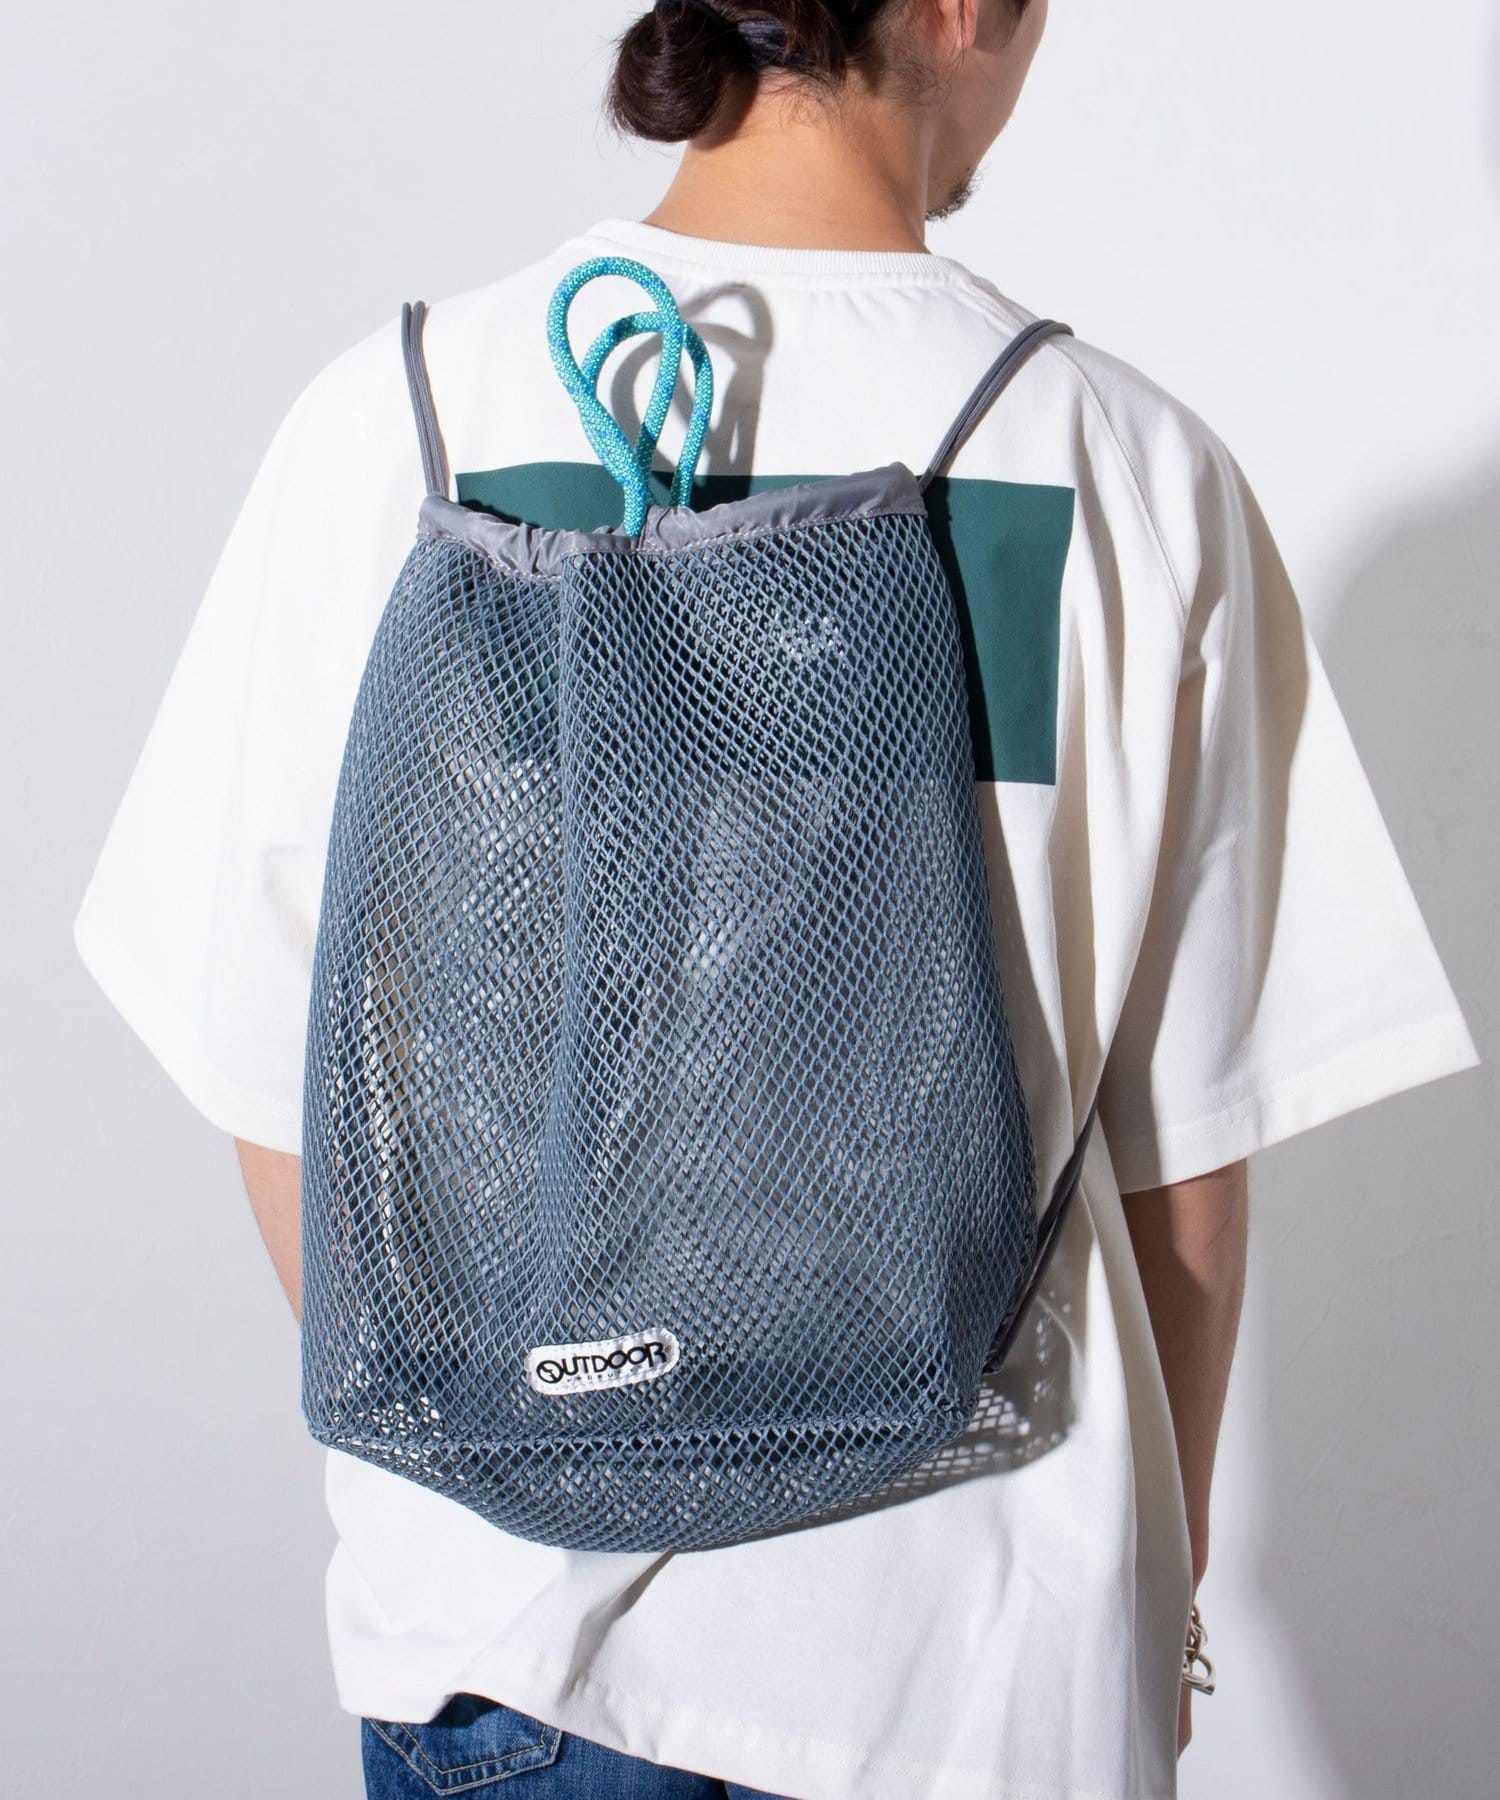 OUTDOOR PRODUCTS】2WAY メッシュトートバッグ/リュック | FREDY